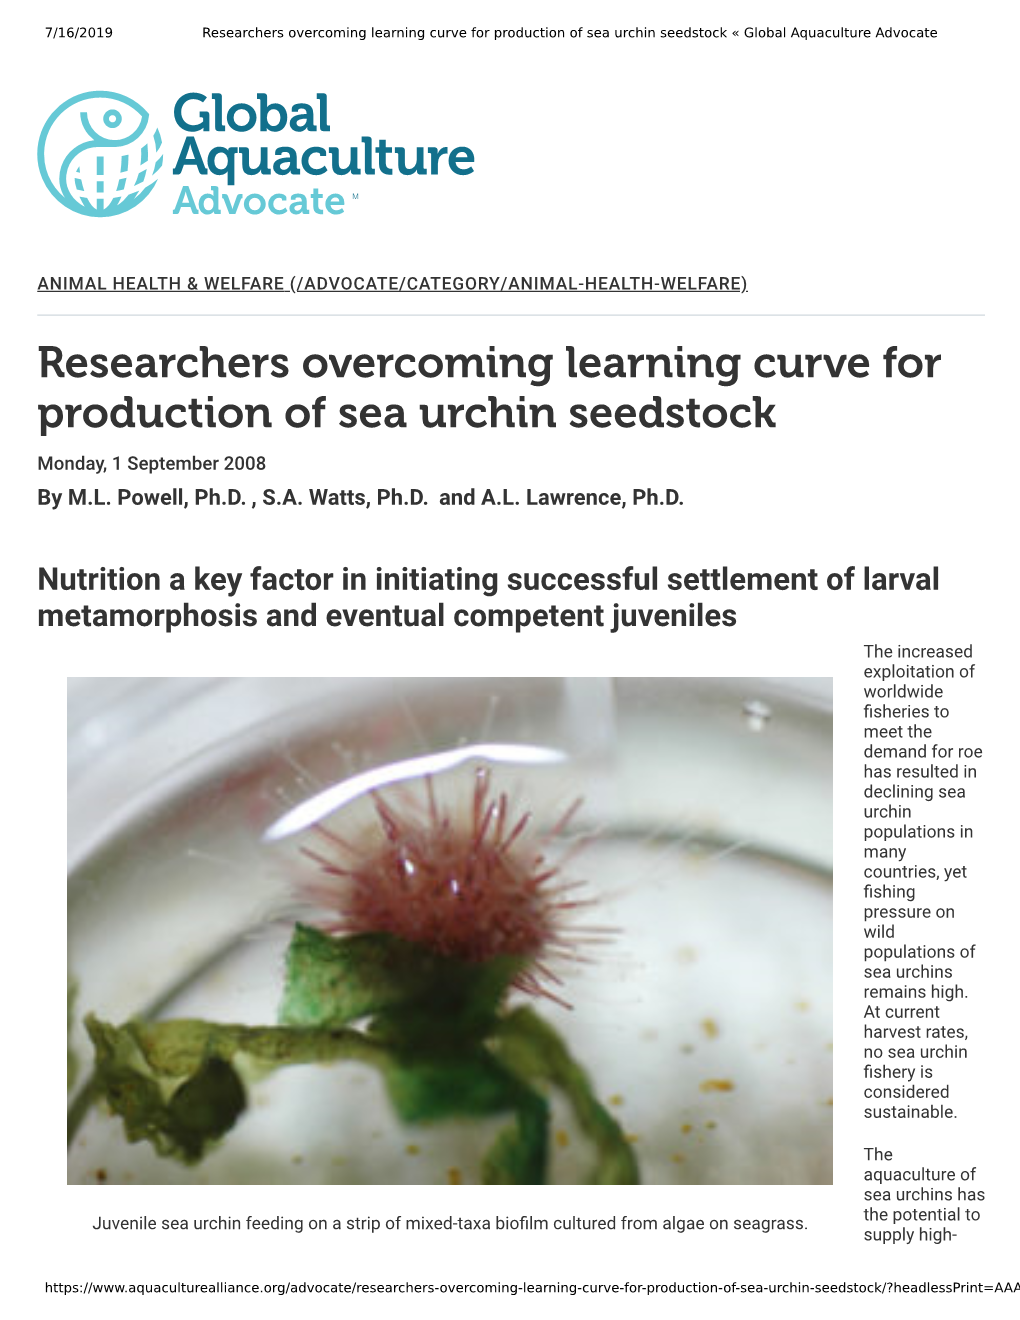 Researchers Overcoming Learning Curve for Production of Sea Urchin Seedstock « Global Aquaculture Advocate